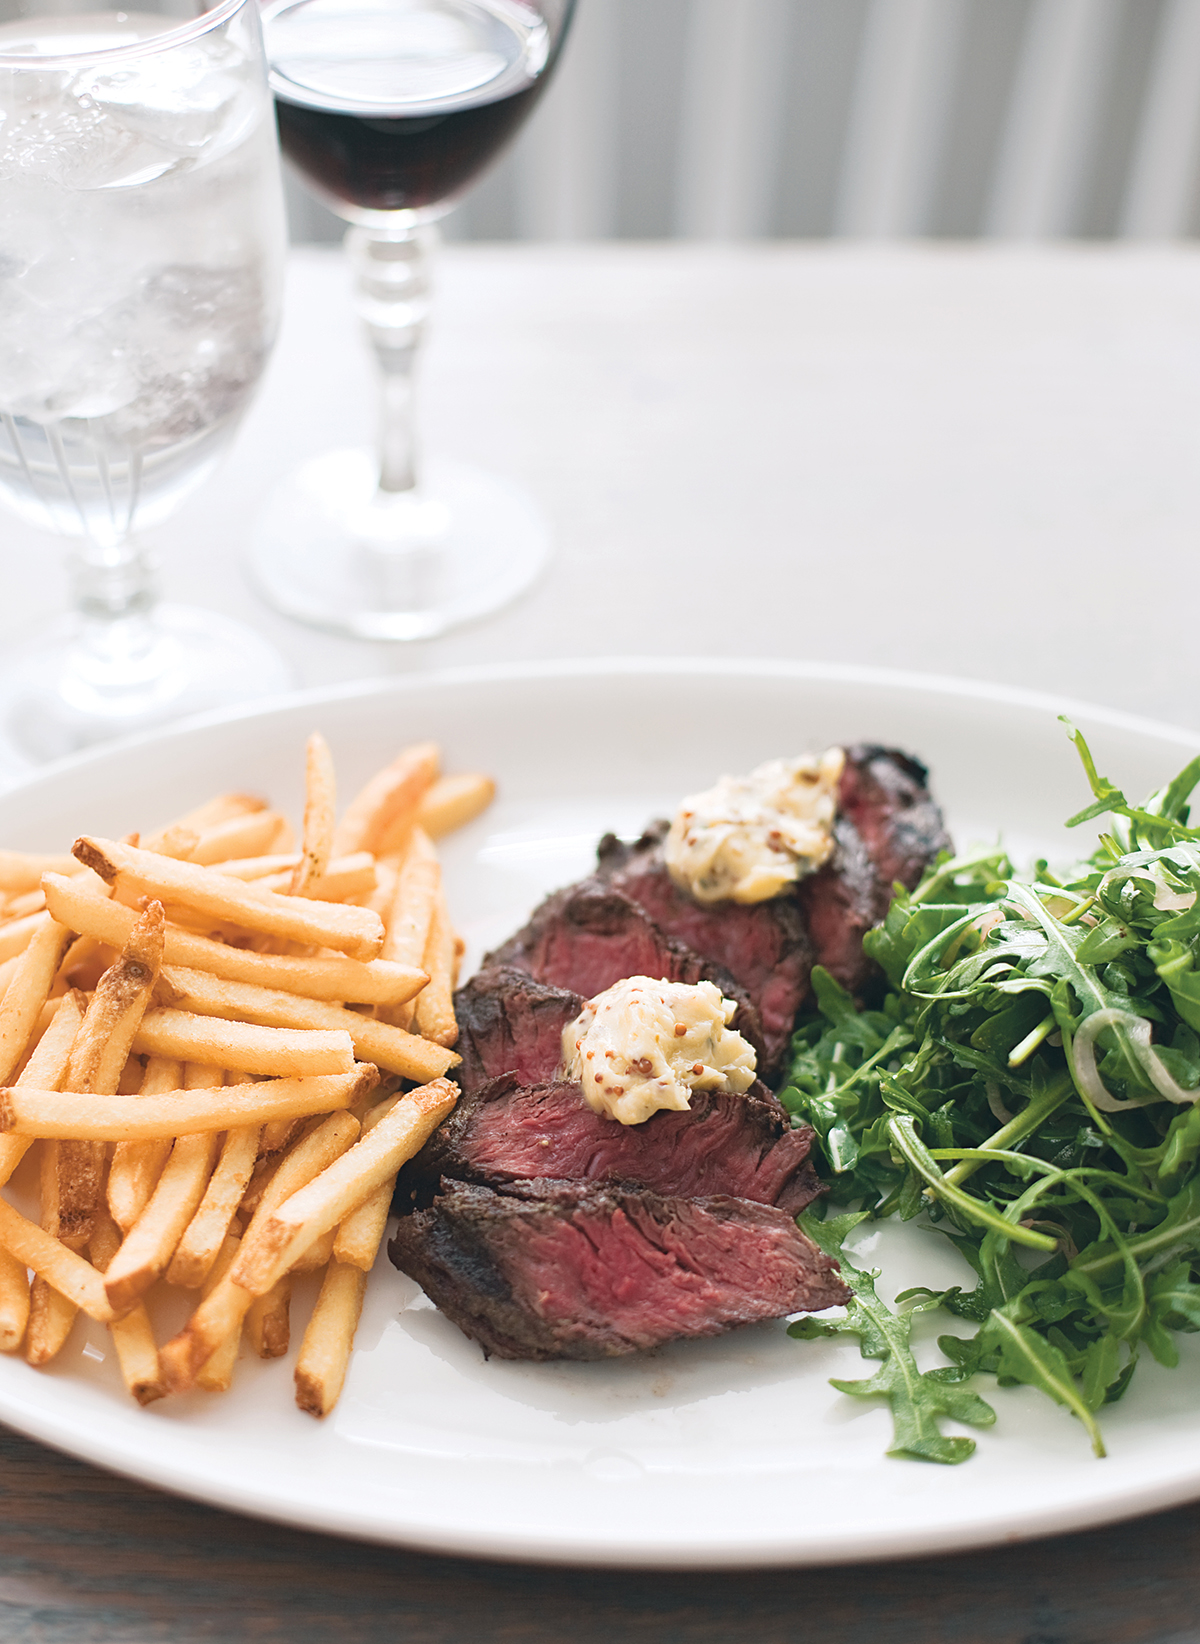 steak frites at woodward in the ames hotel. Photograph by Keller + Keller.